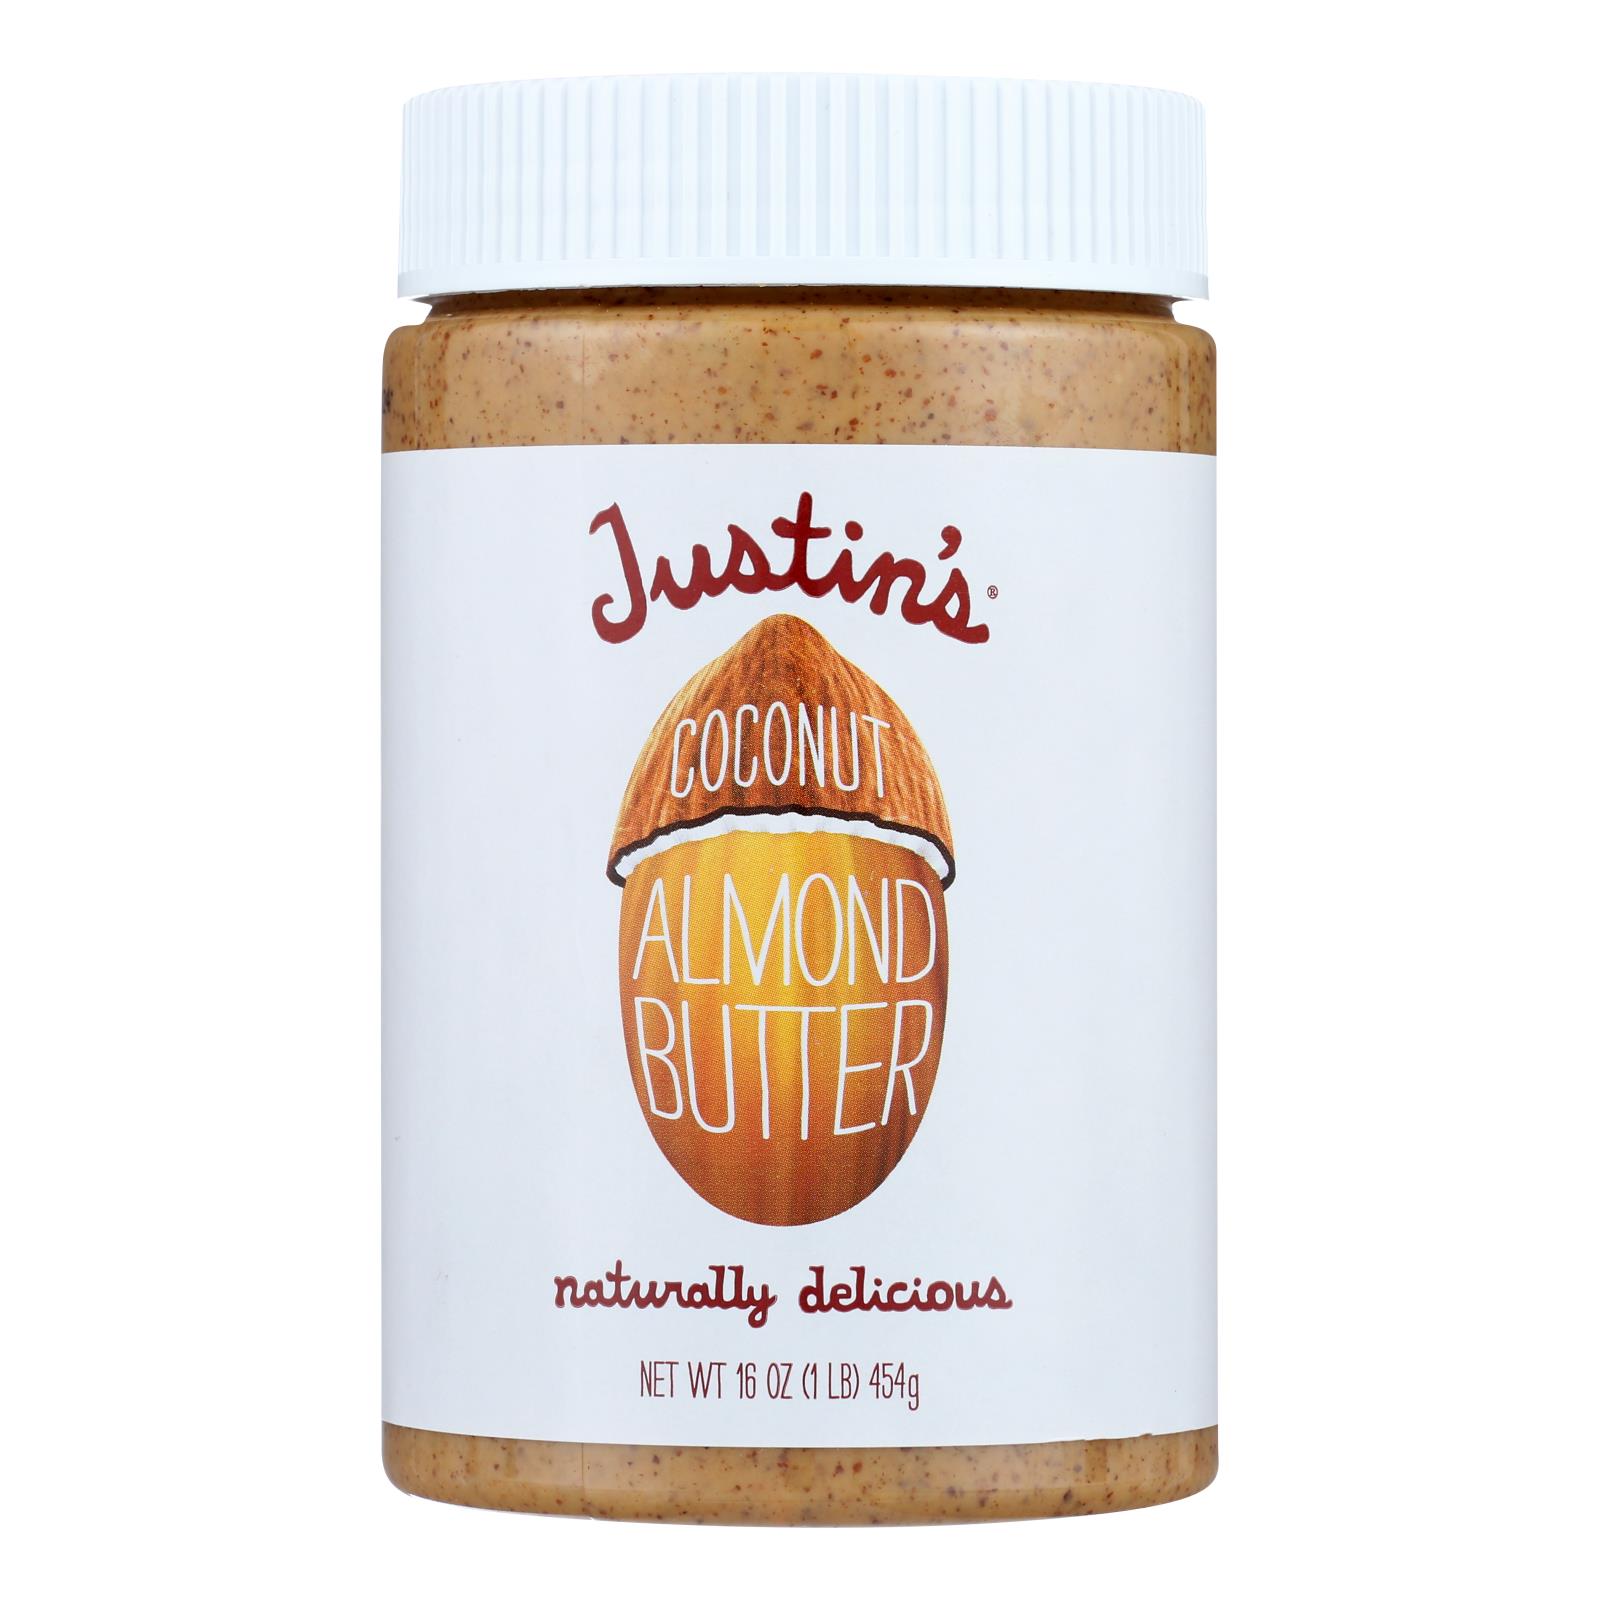 Justin's Nut Butter - Almond Butter Coconut - 6개 묶음상품 - 16 OZ